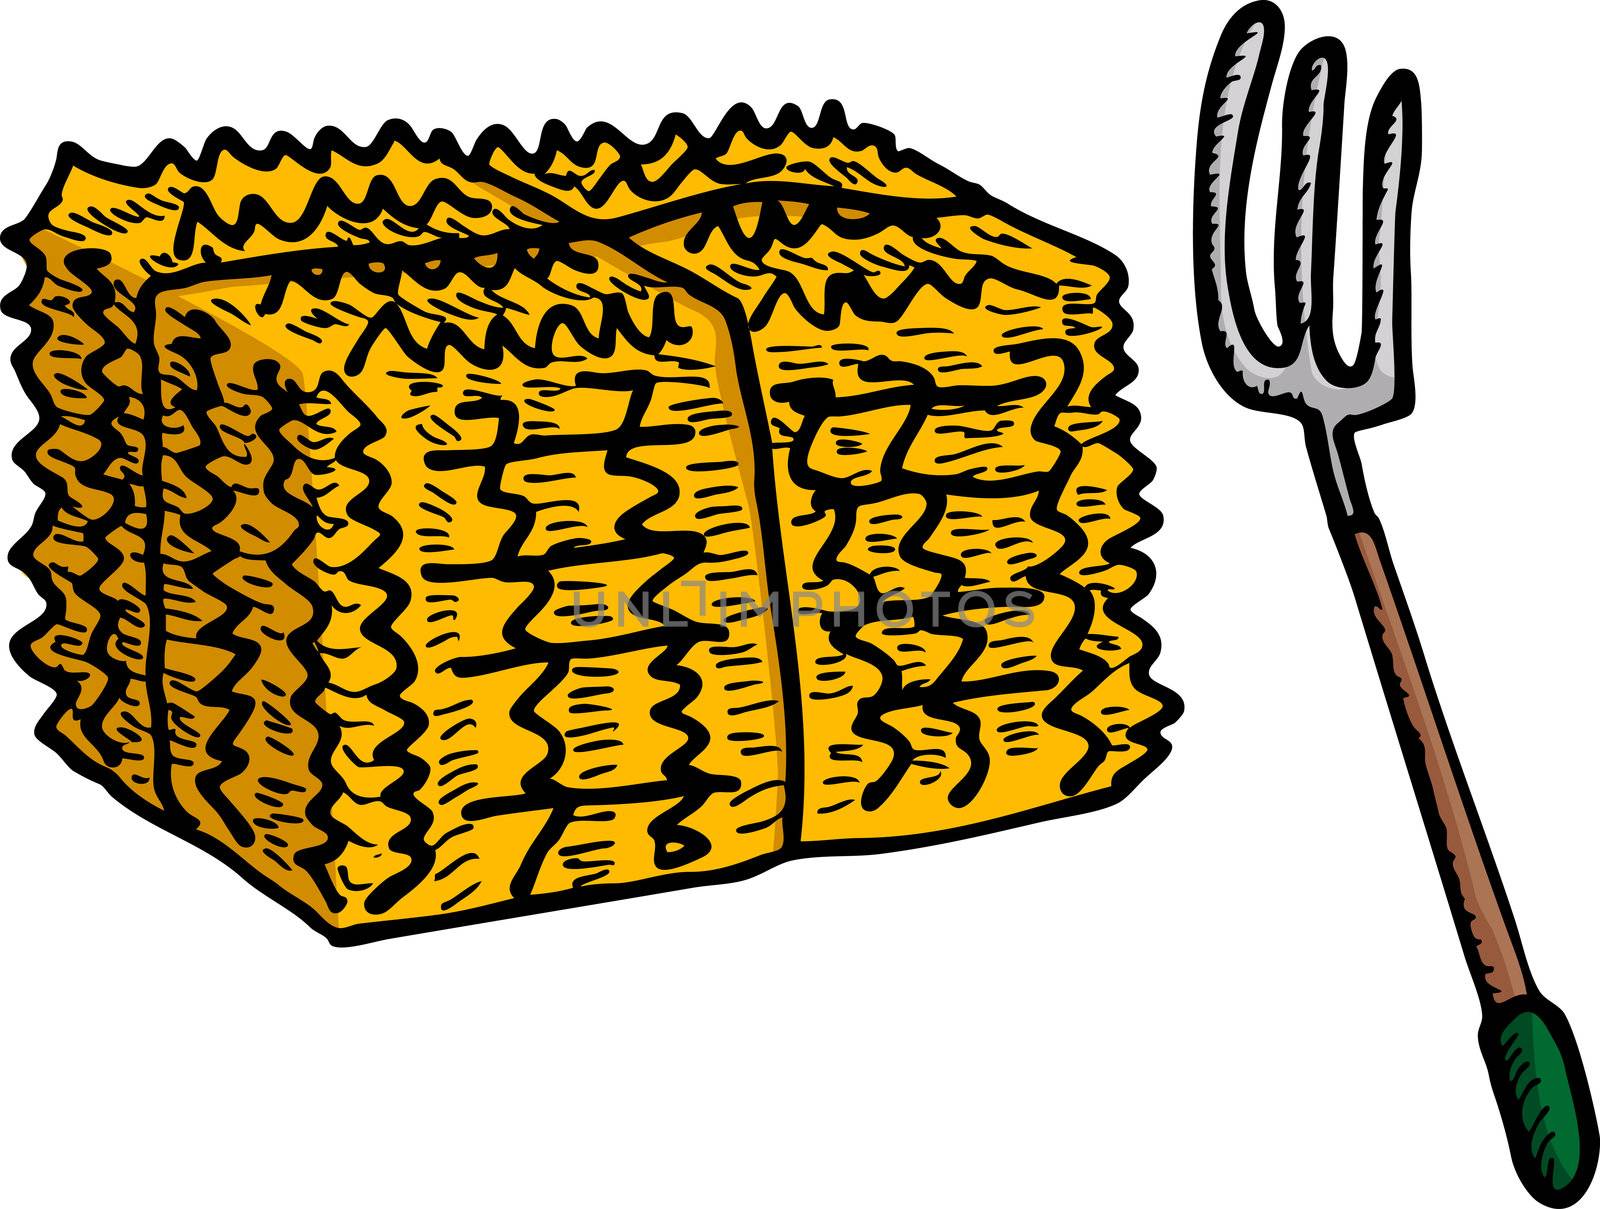 Isolated stack of hay and pitchfork illustration